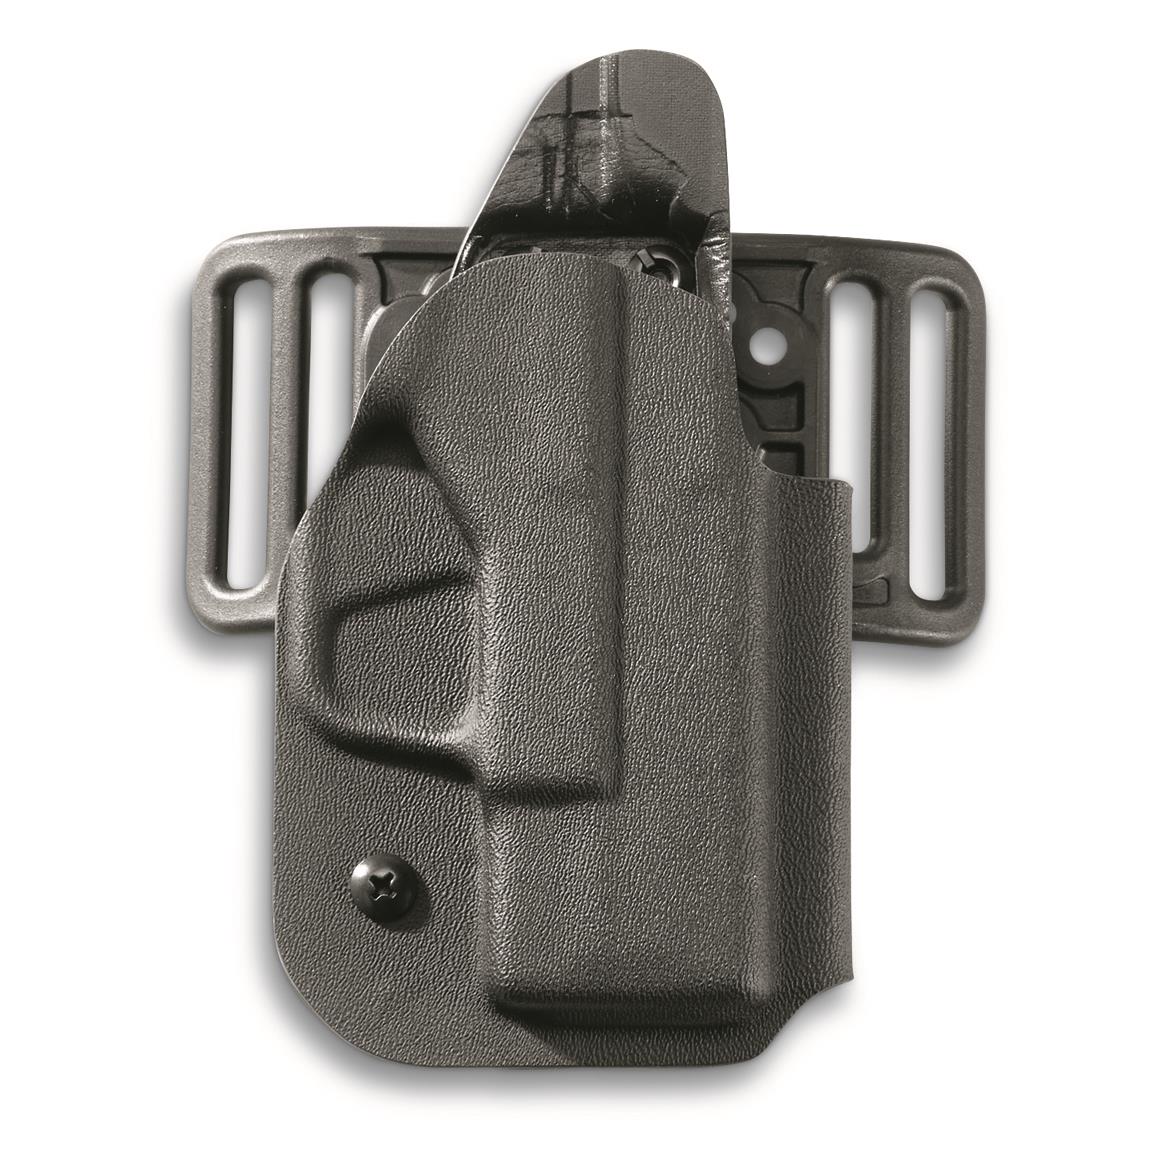 JX Tactical Low Rider OWB Holster, Springfield Hellcat